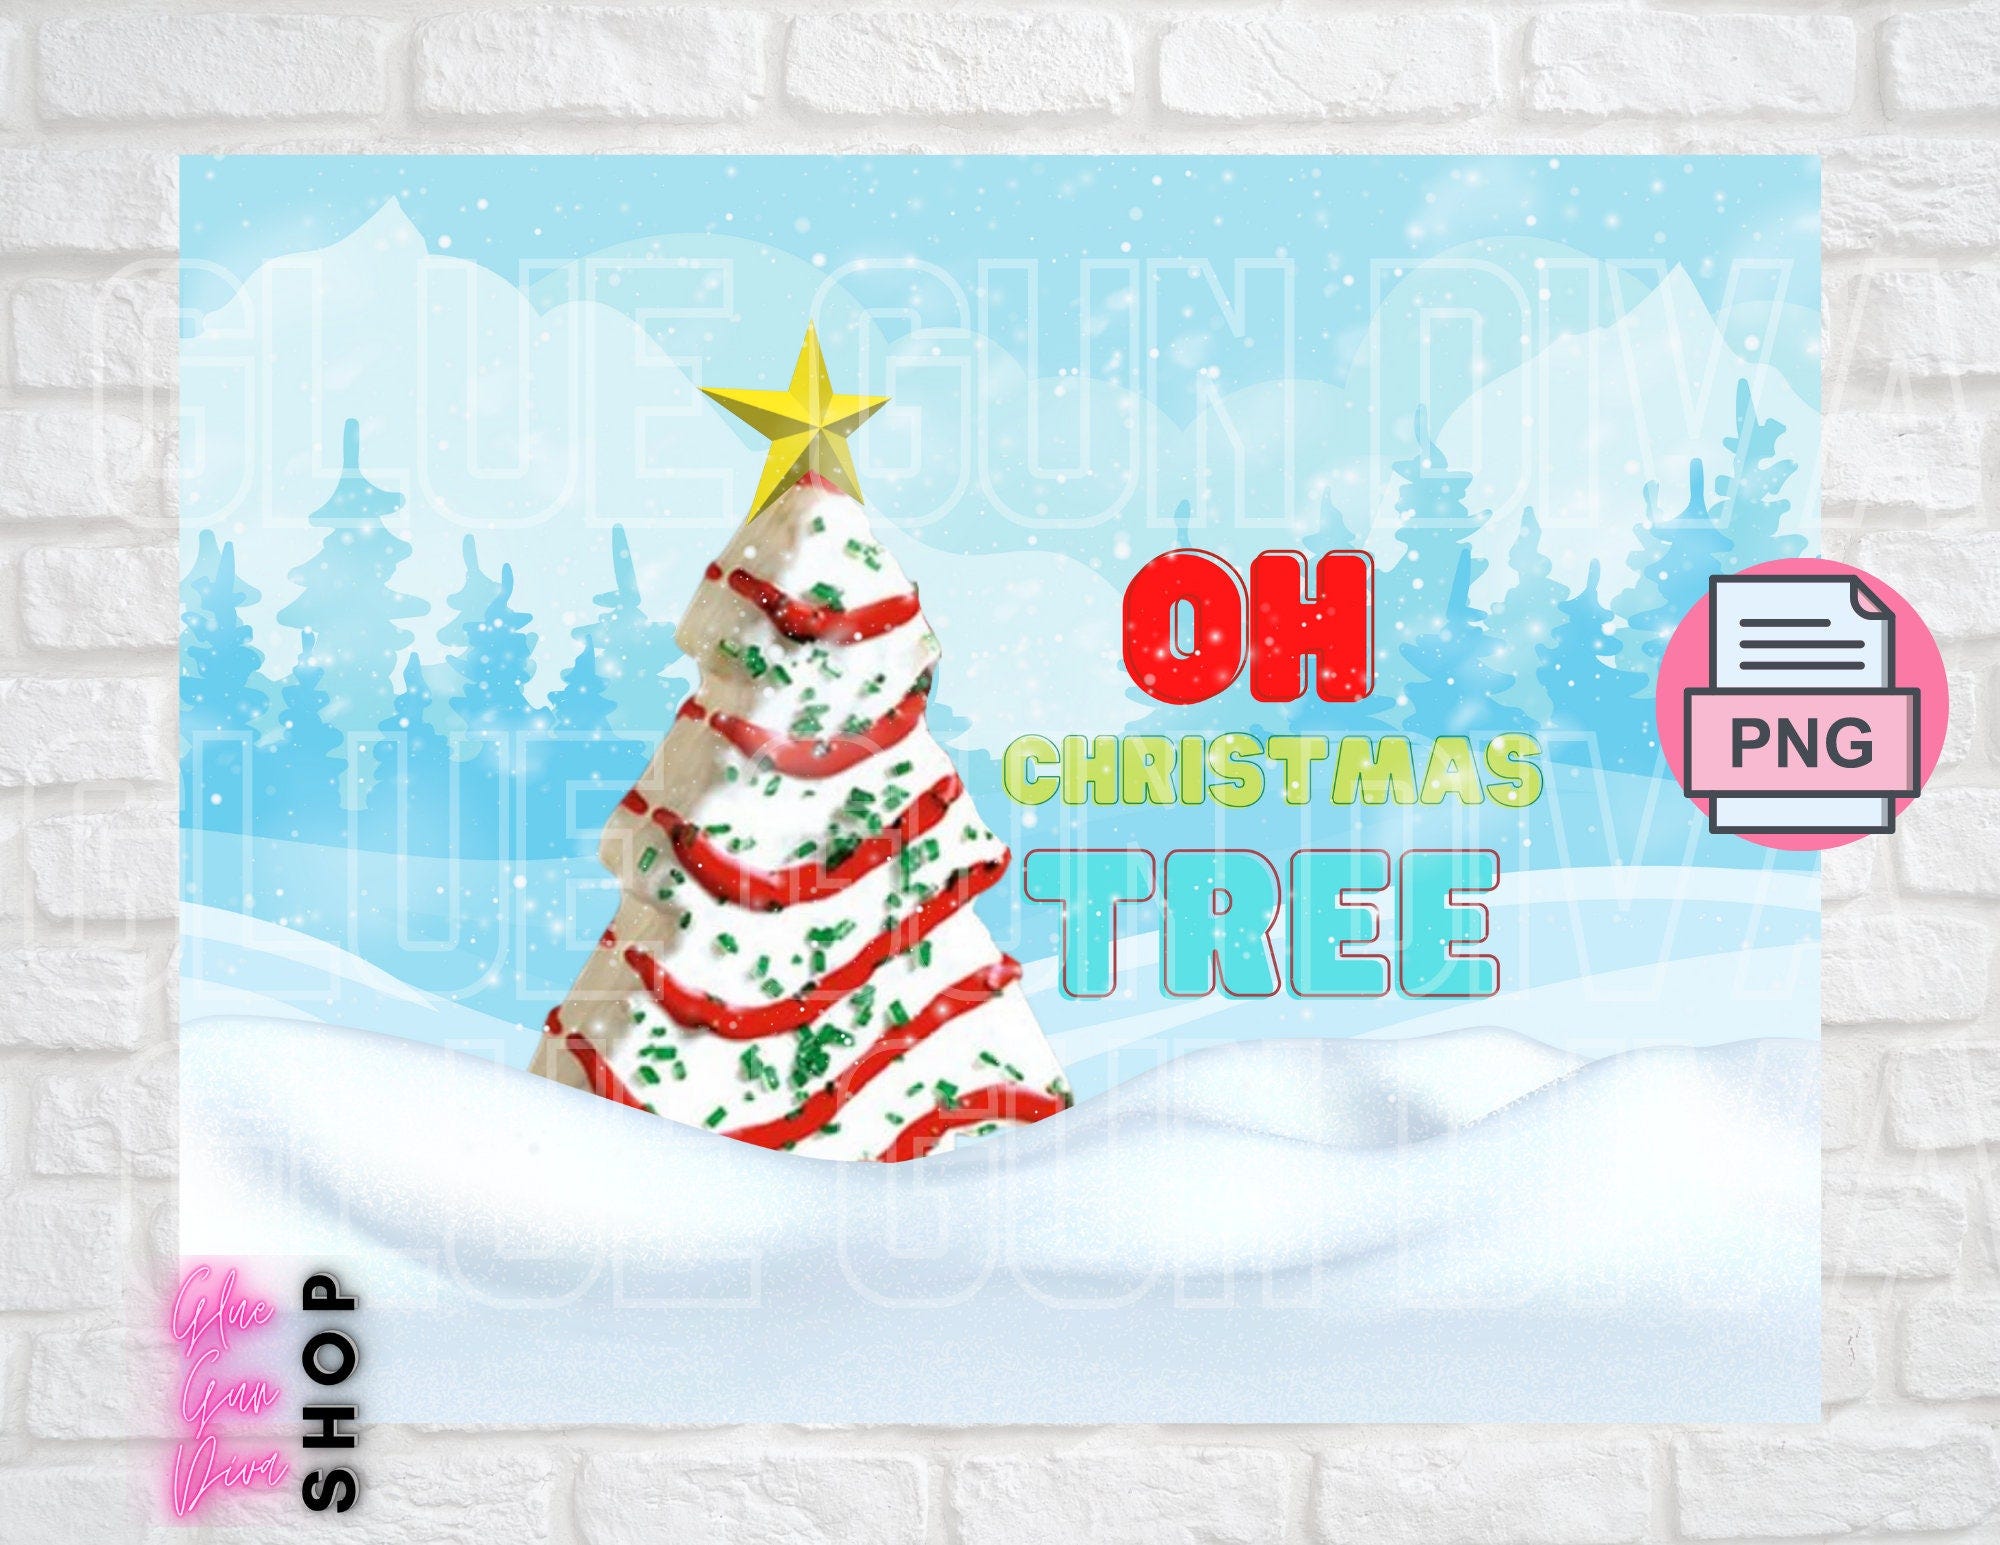 LITTLE DEBBIE TREE Christmas cake Oh Christmas Tree Snowy Background,  png format